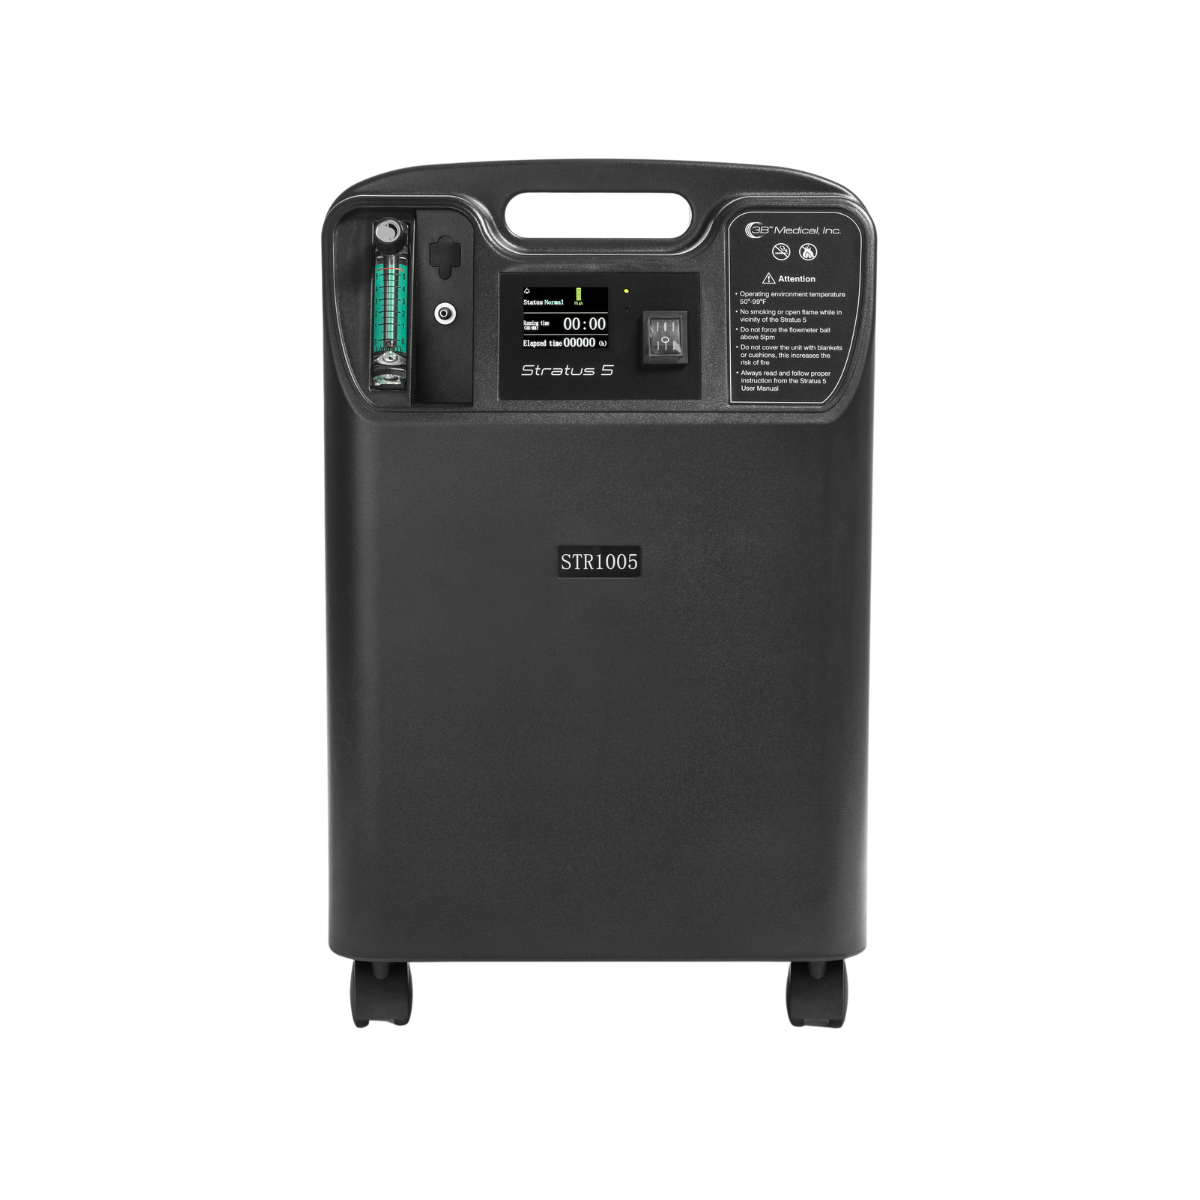 Image of Stratus 5L Stationary Oxygen Concentrator